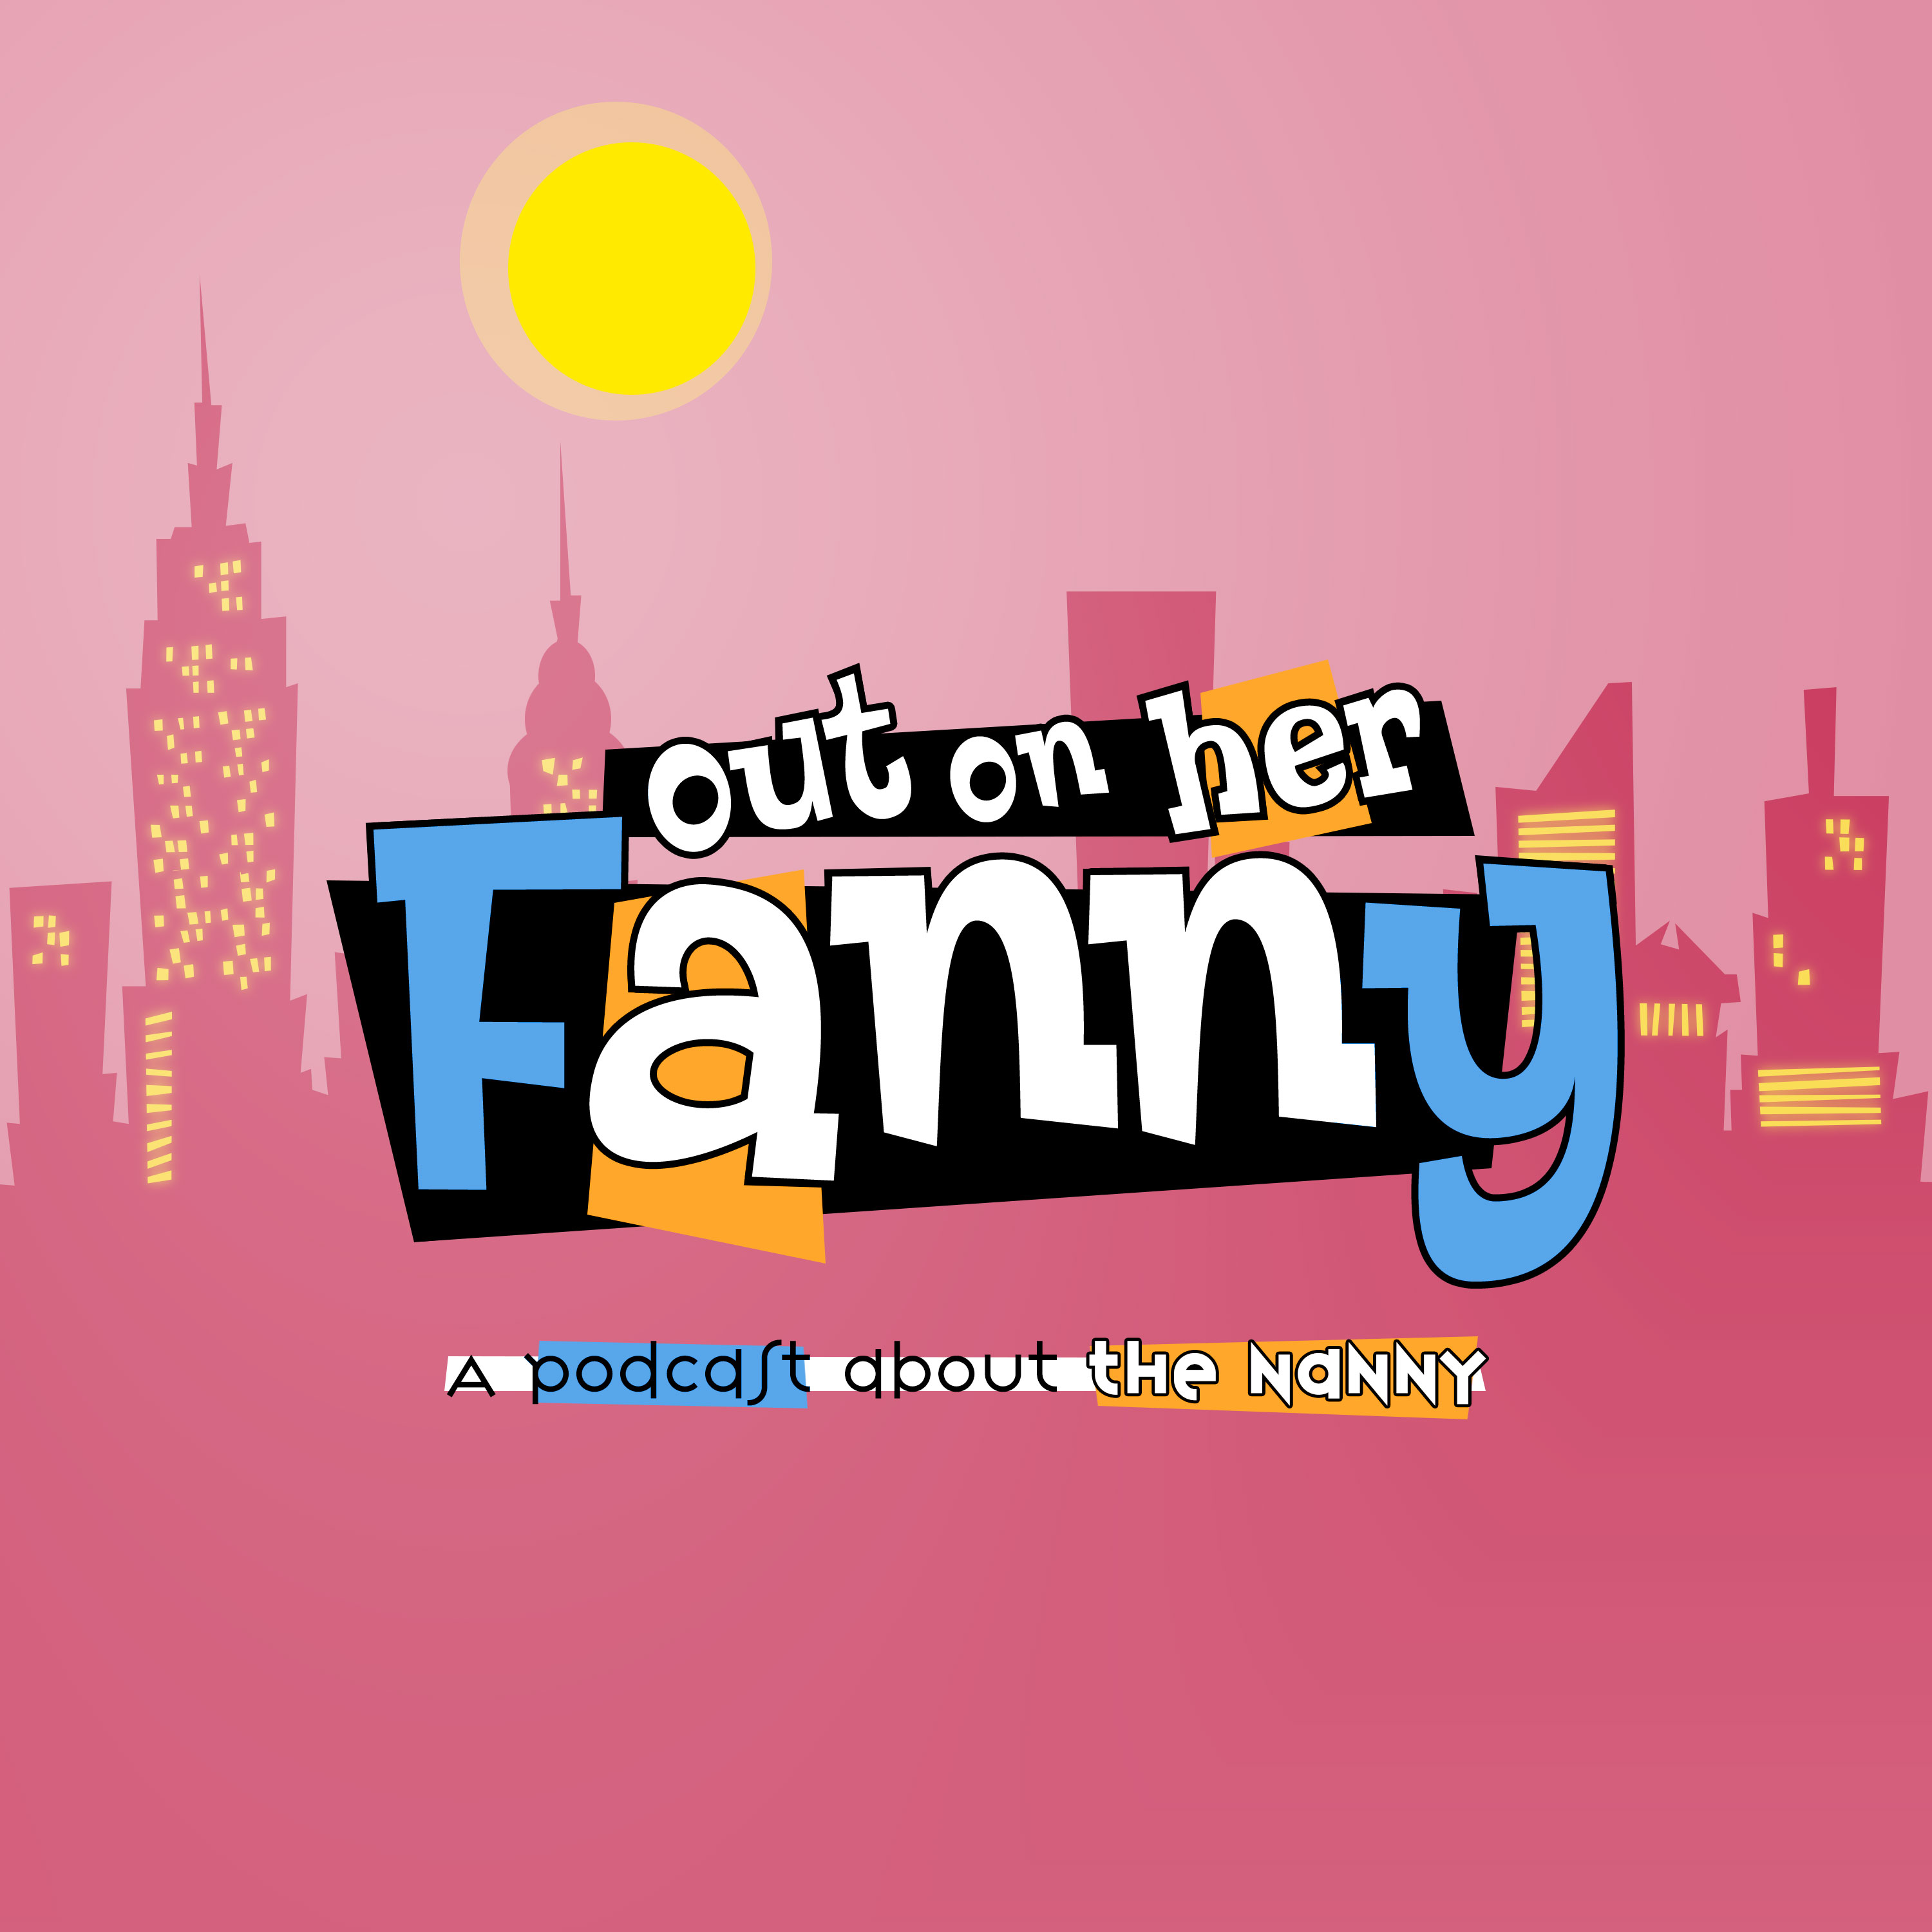 Out on her Fanny: A Podcast About The Nanny